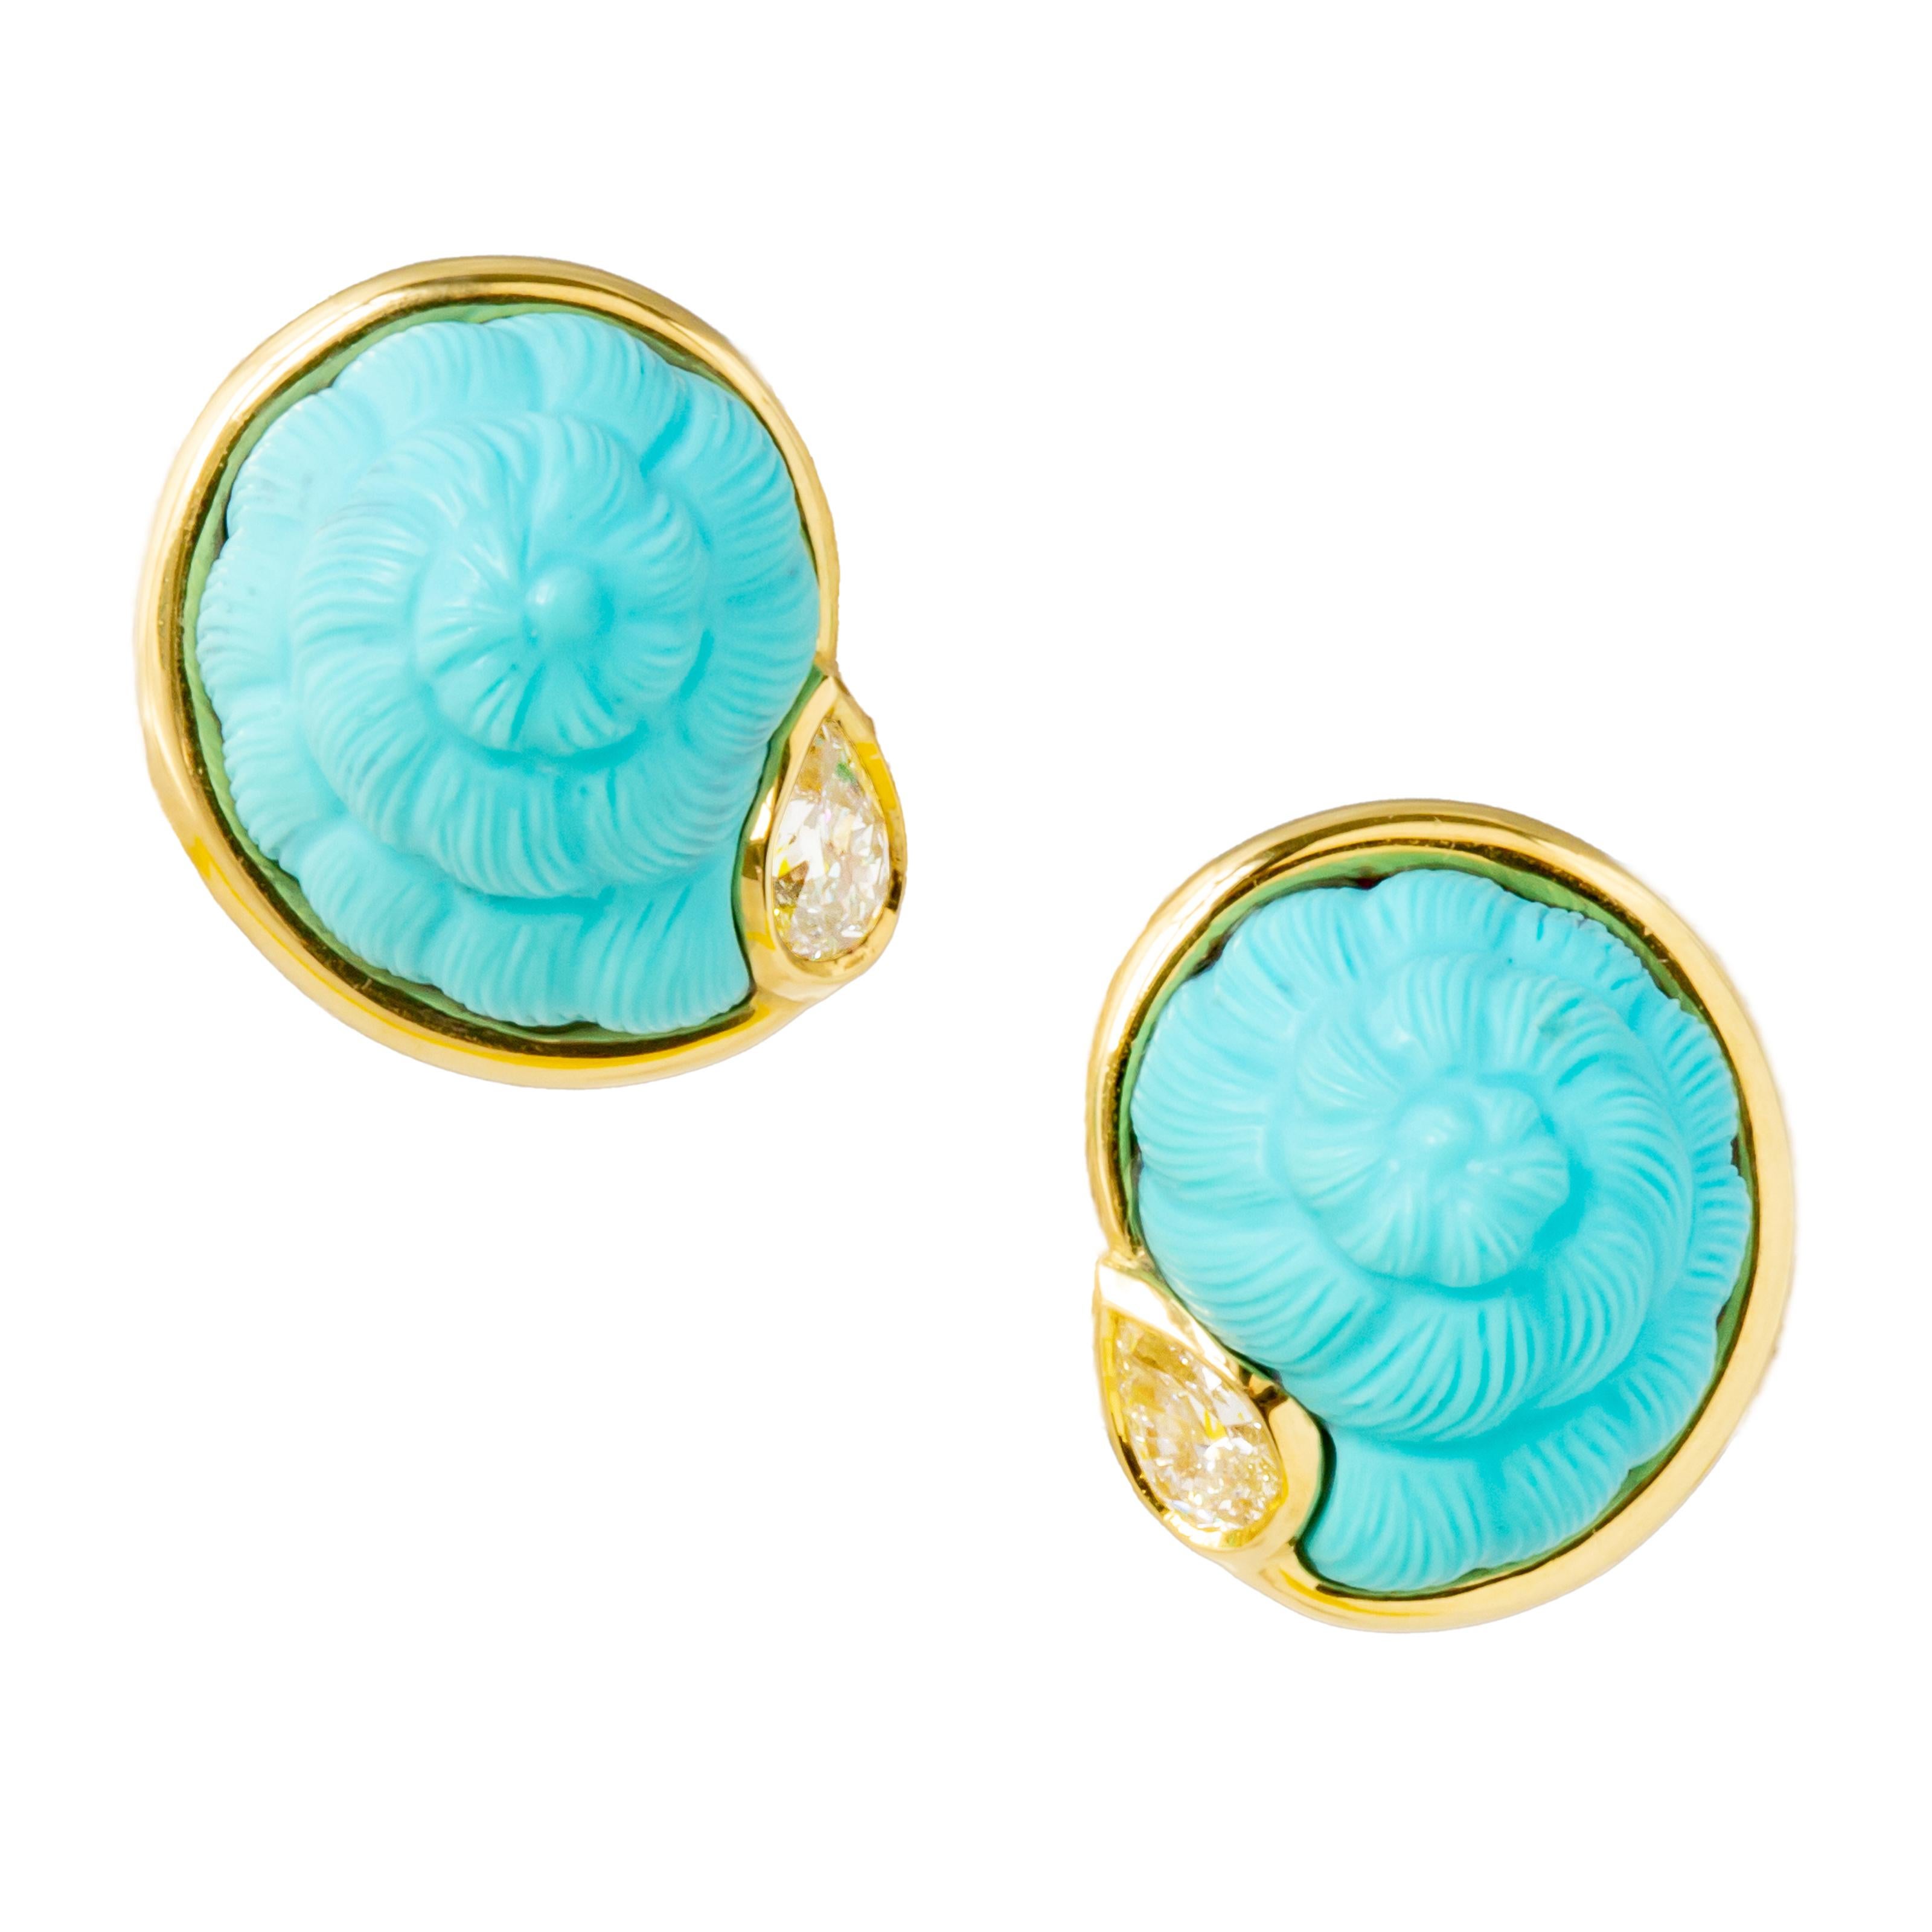 Hand Carved Sleeping Beauty Turquoise Nautilus earrings with pear shaped Diamonds set in 18kt Gold 

Turquoise: 17mm x 14.5mm x 10mm
Diamonds: 0.77ct; VS-F Color

Clip on with Post